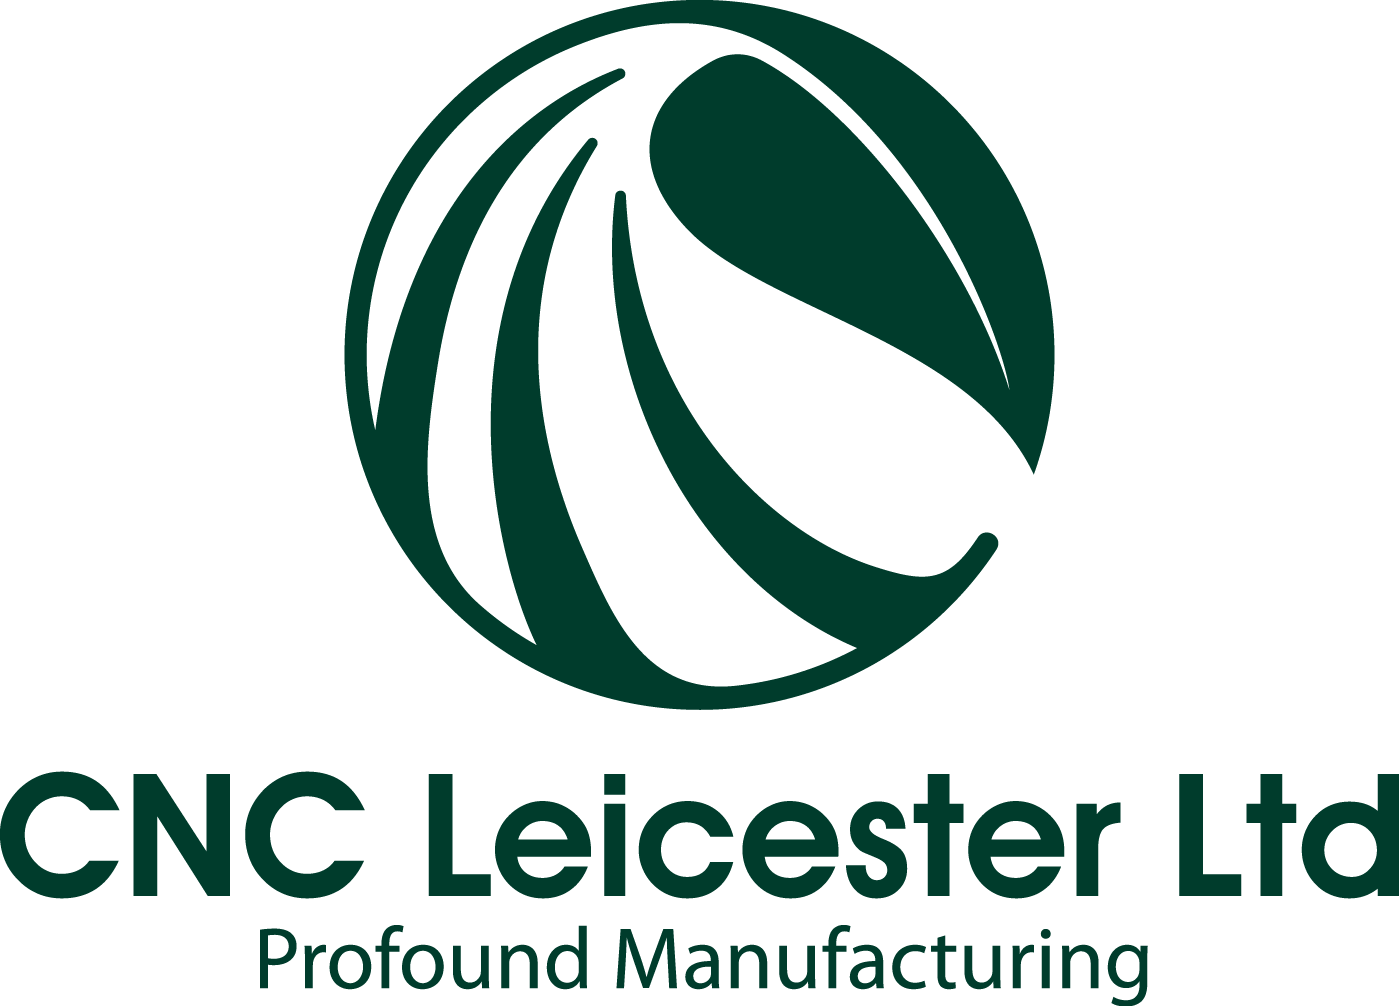 CNC Leicester